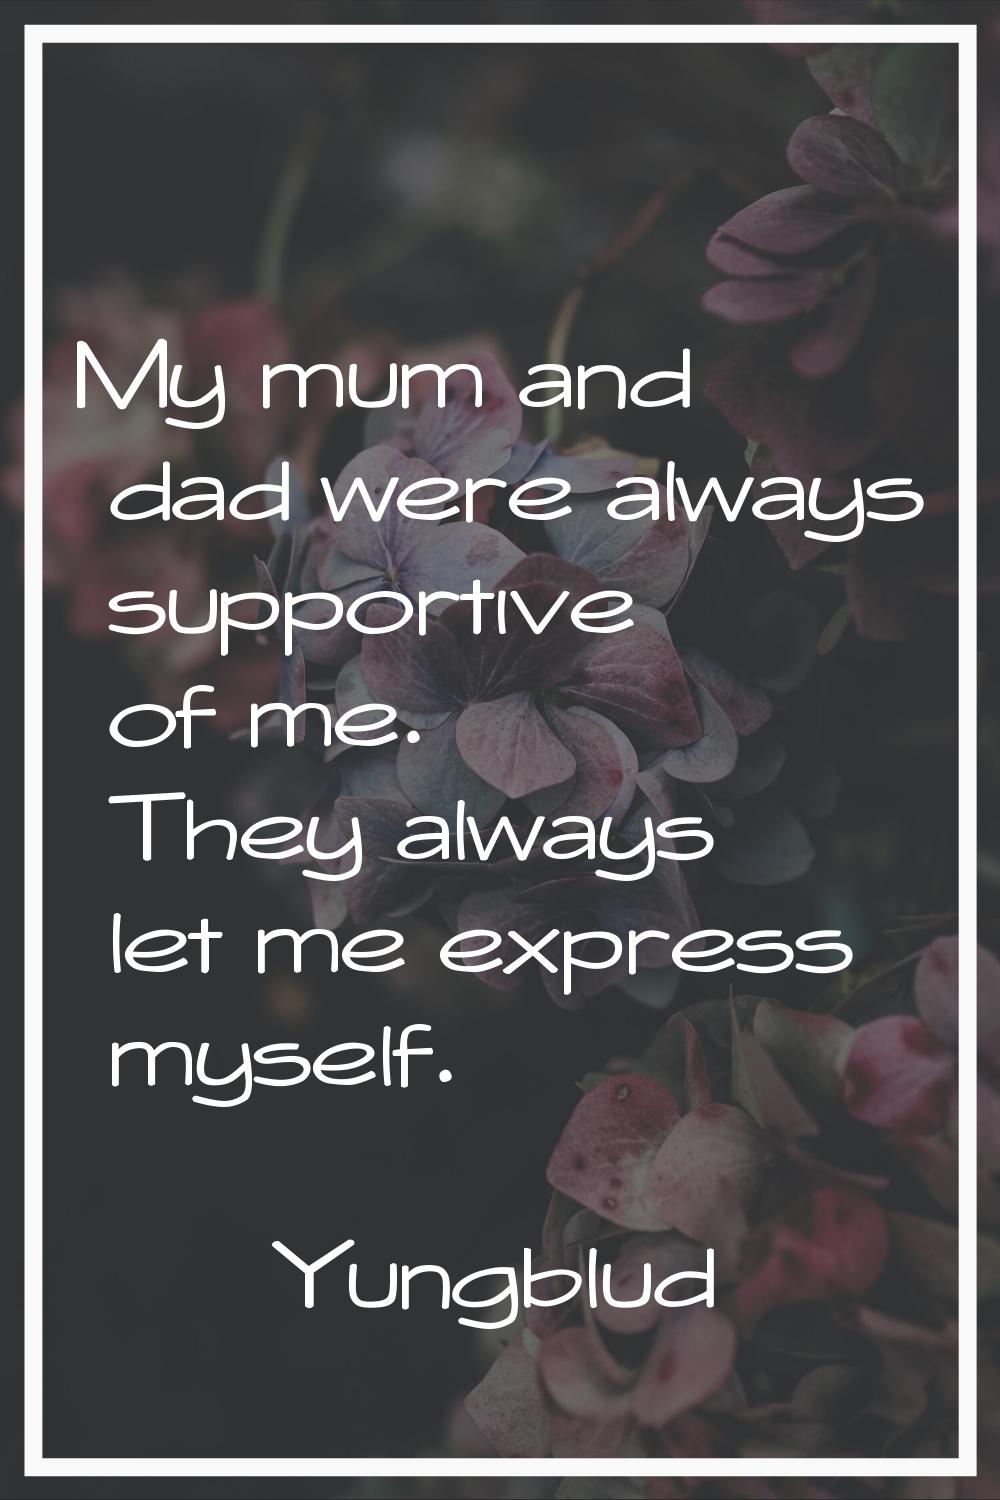 My mum and dad were always supportive of me. They always let me express myself.